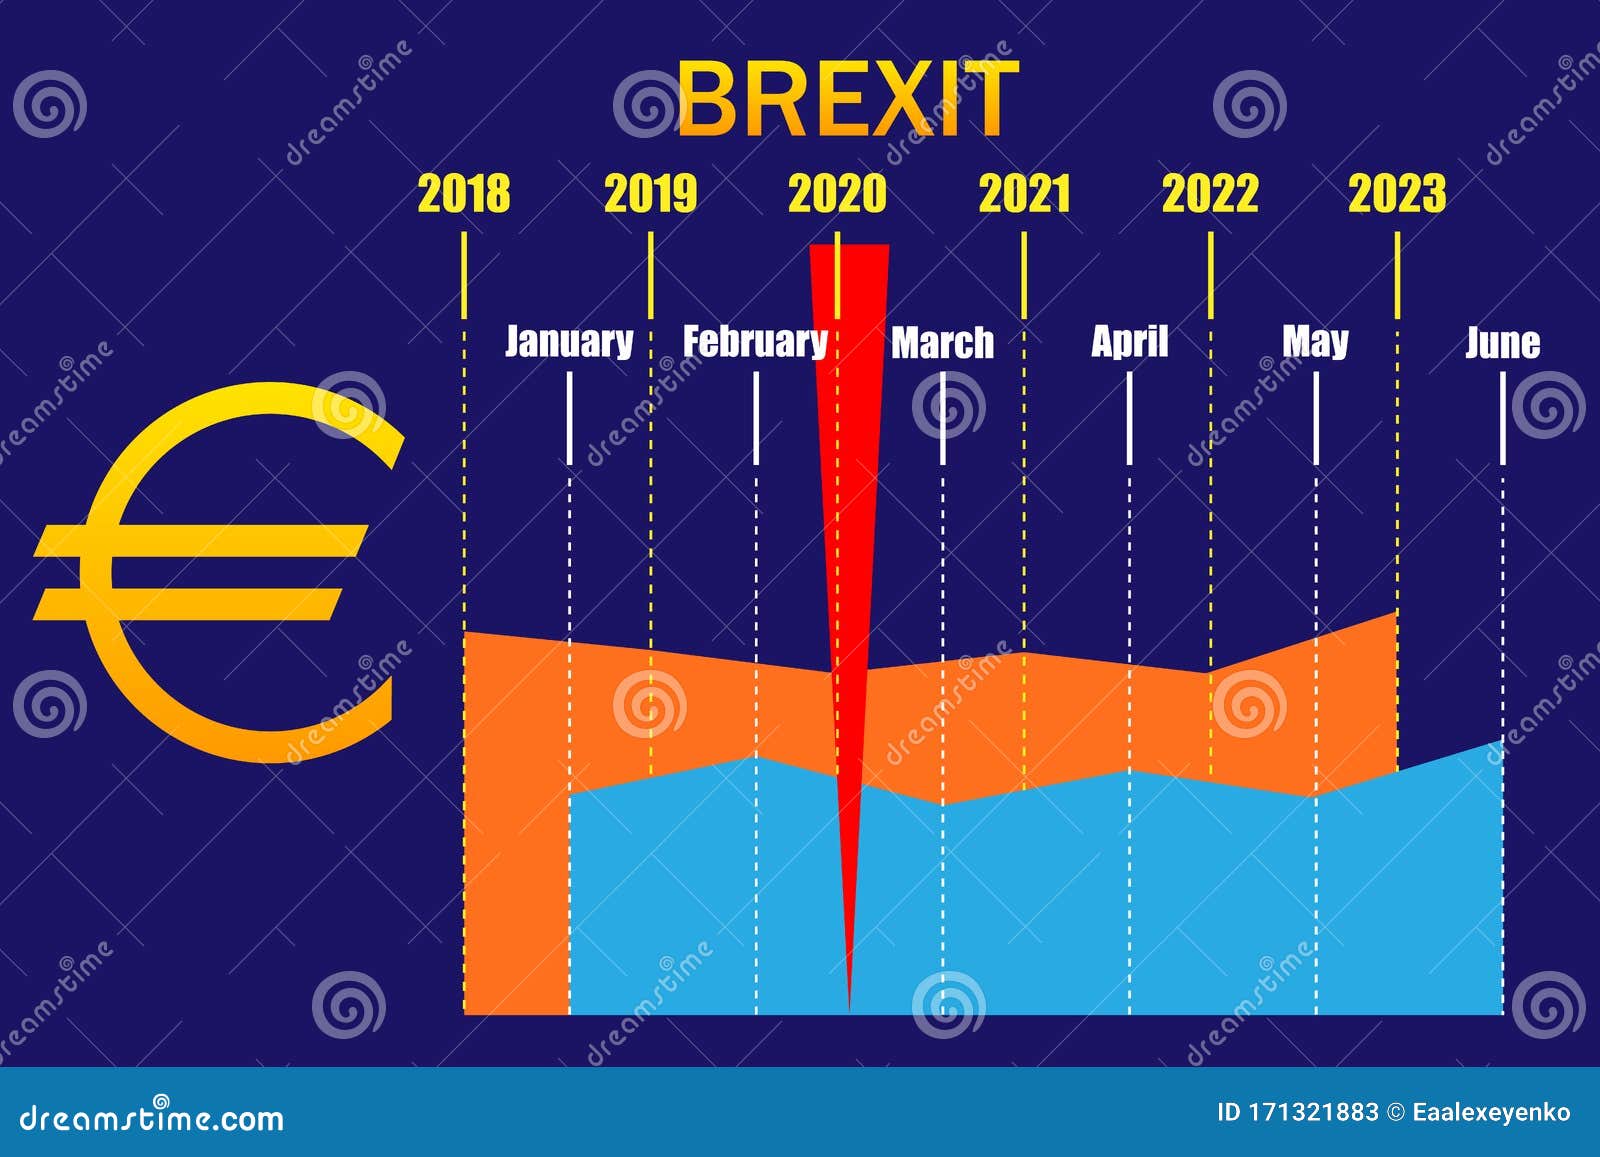 euro-currency-exchange-rate-rise-and-fall-graph-before-and-after-brexit-stock-vector